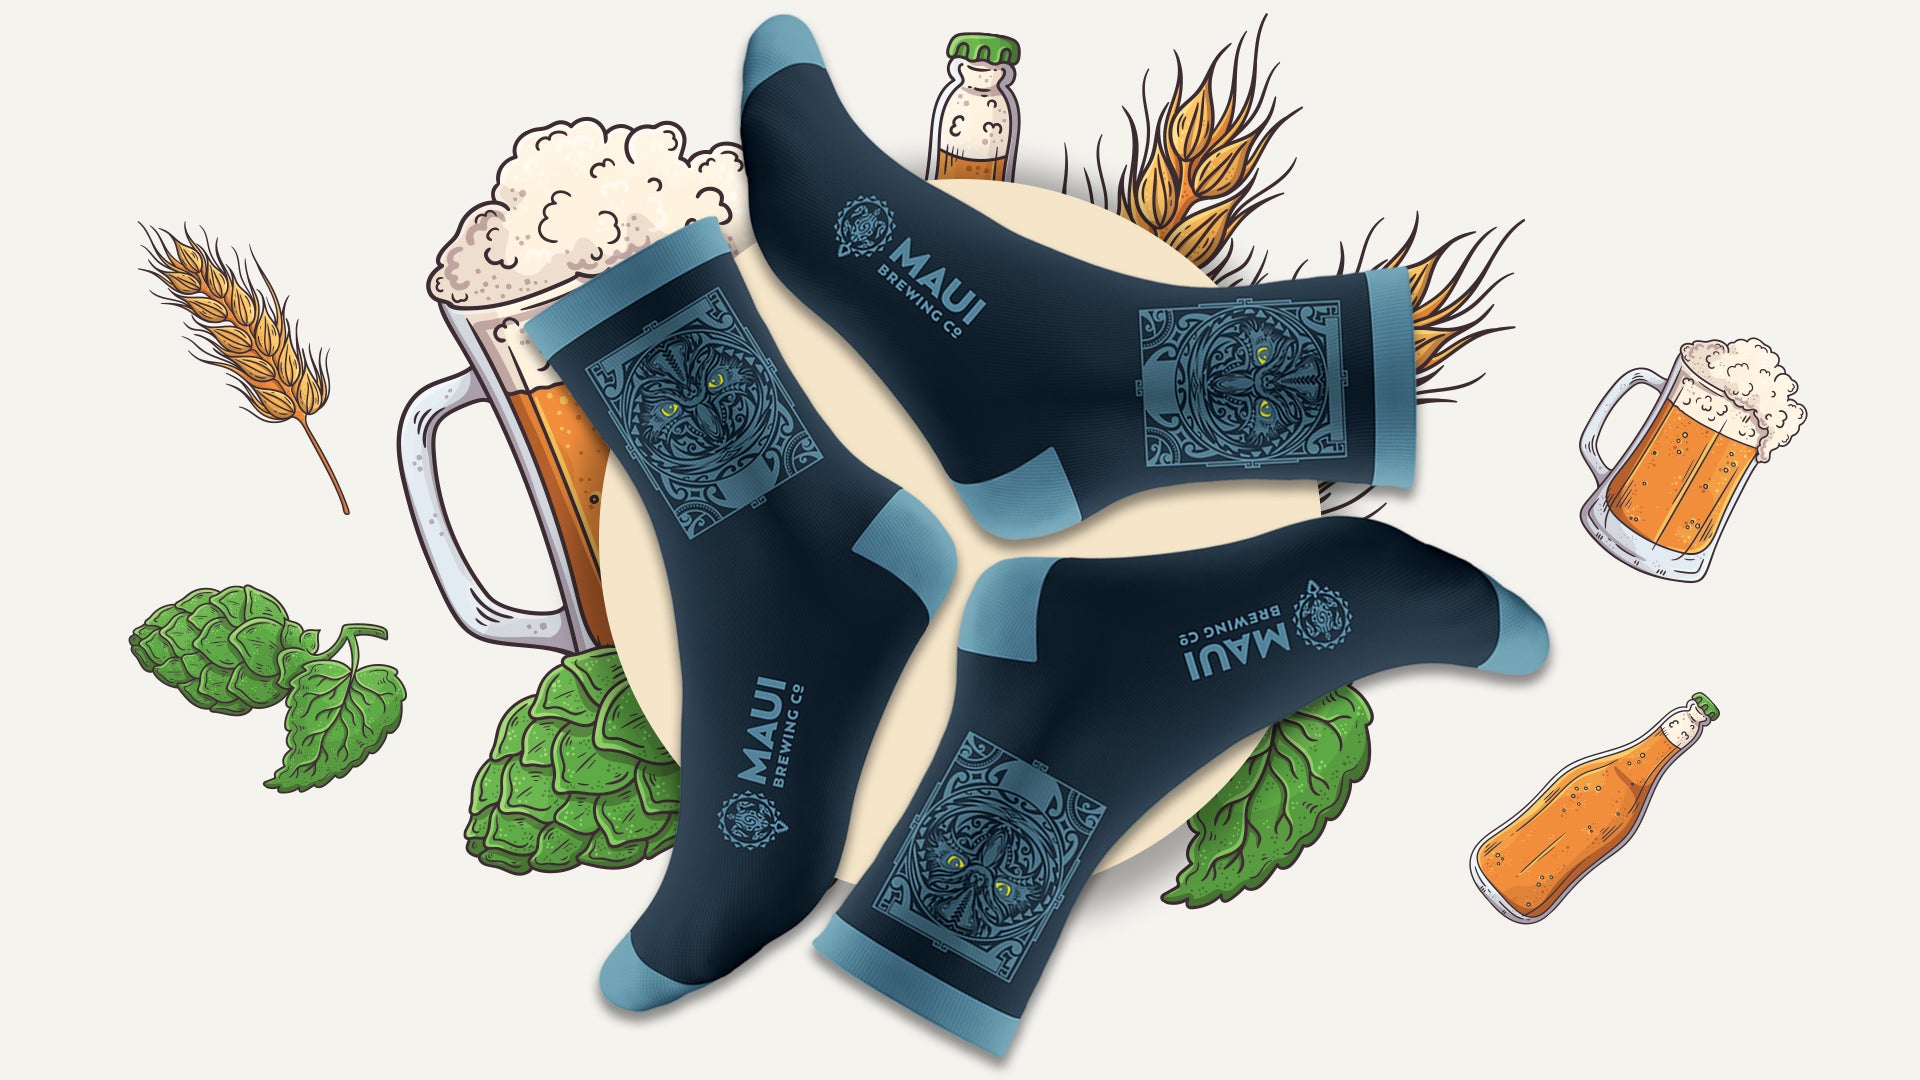 Maui Brewing Company Pueo Pale Ale Crew Socks - Navy Blue color Cotton made